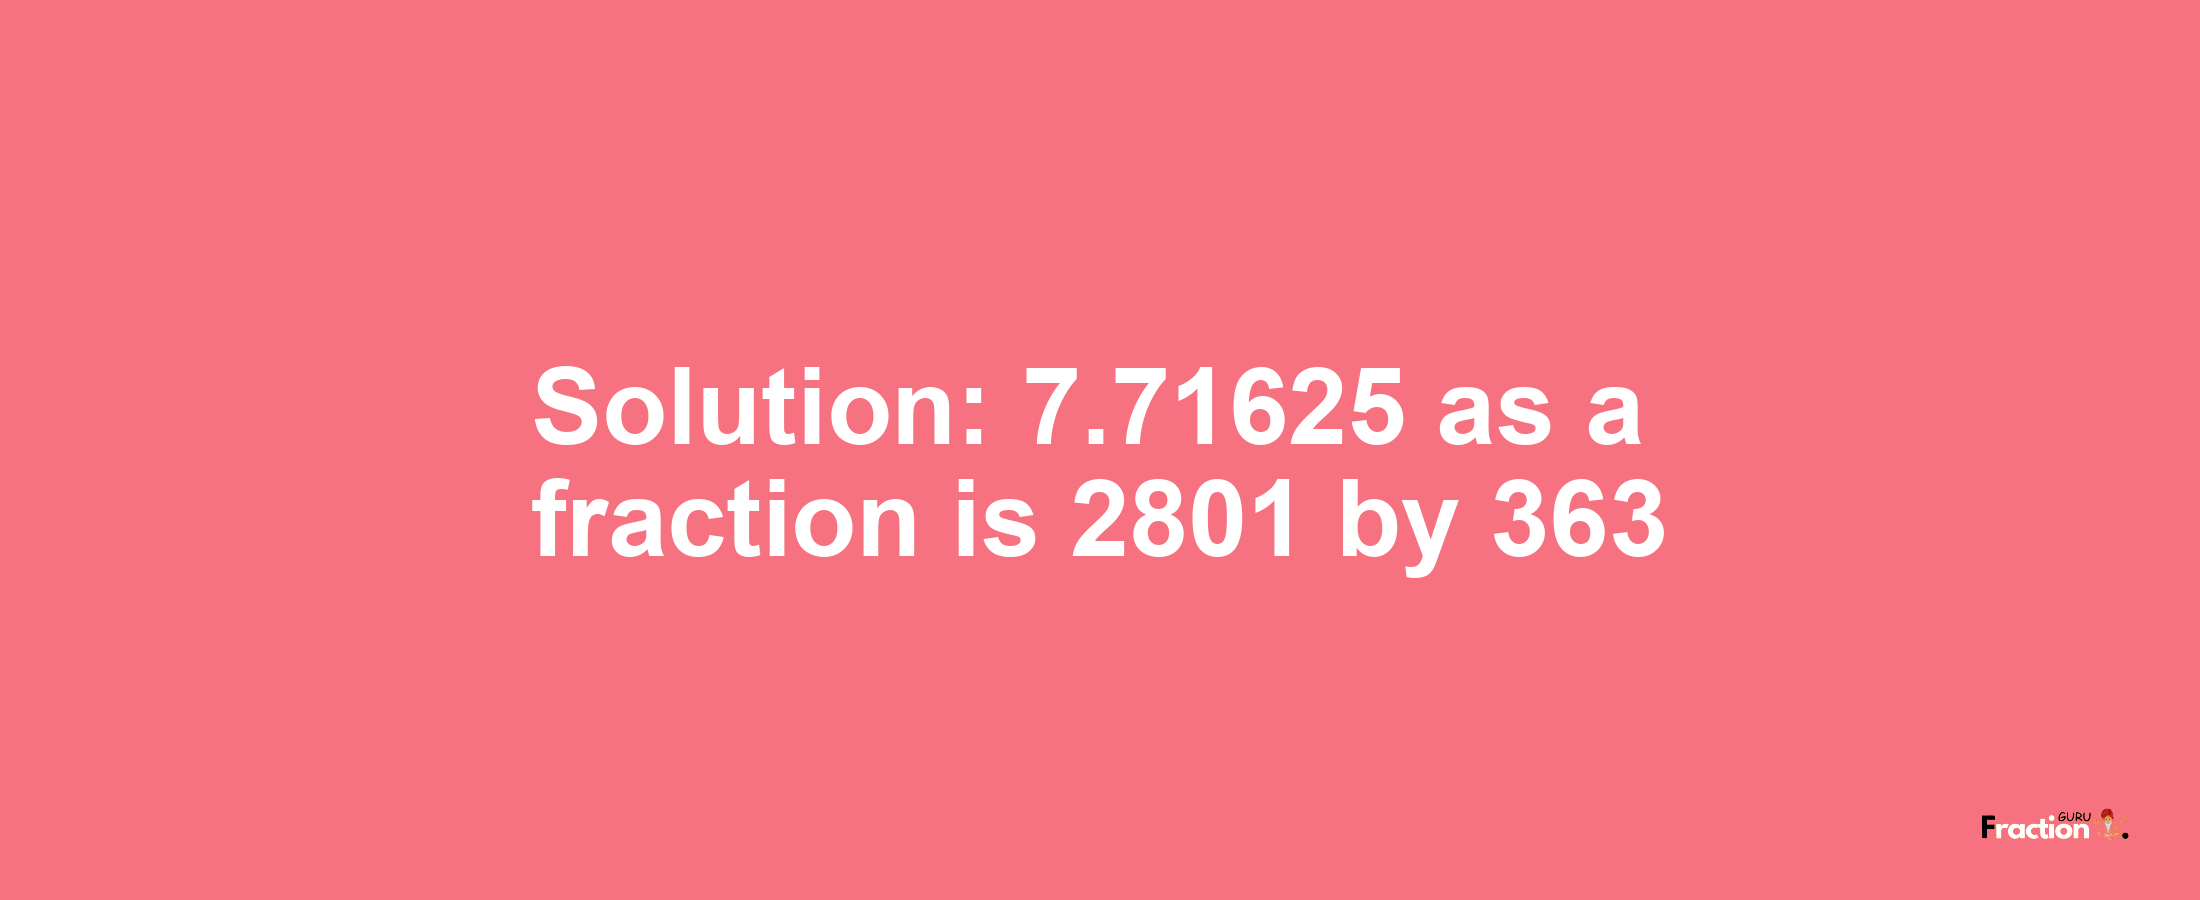 Solution:7.71625 as a fraction is 2801/363